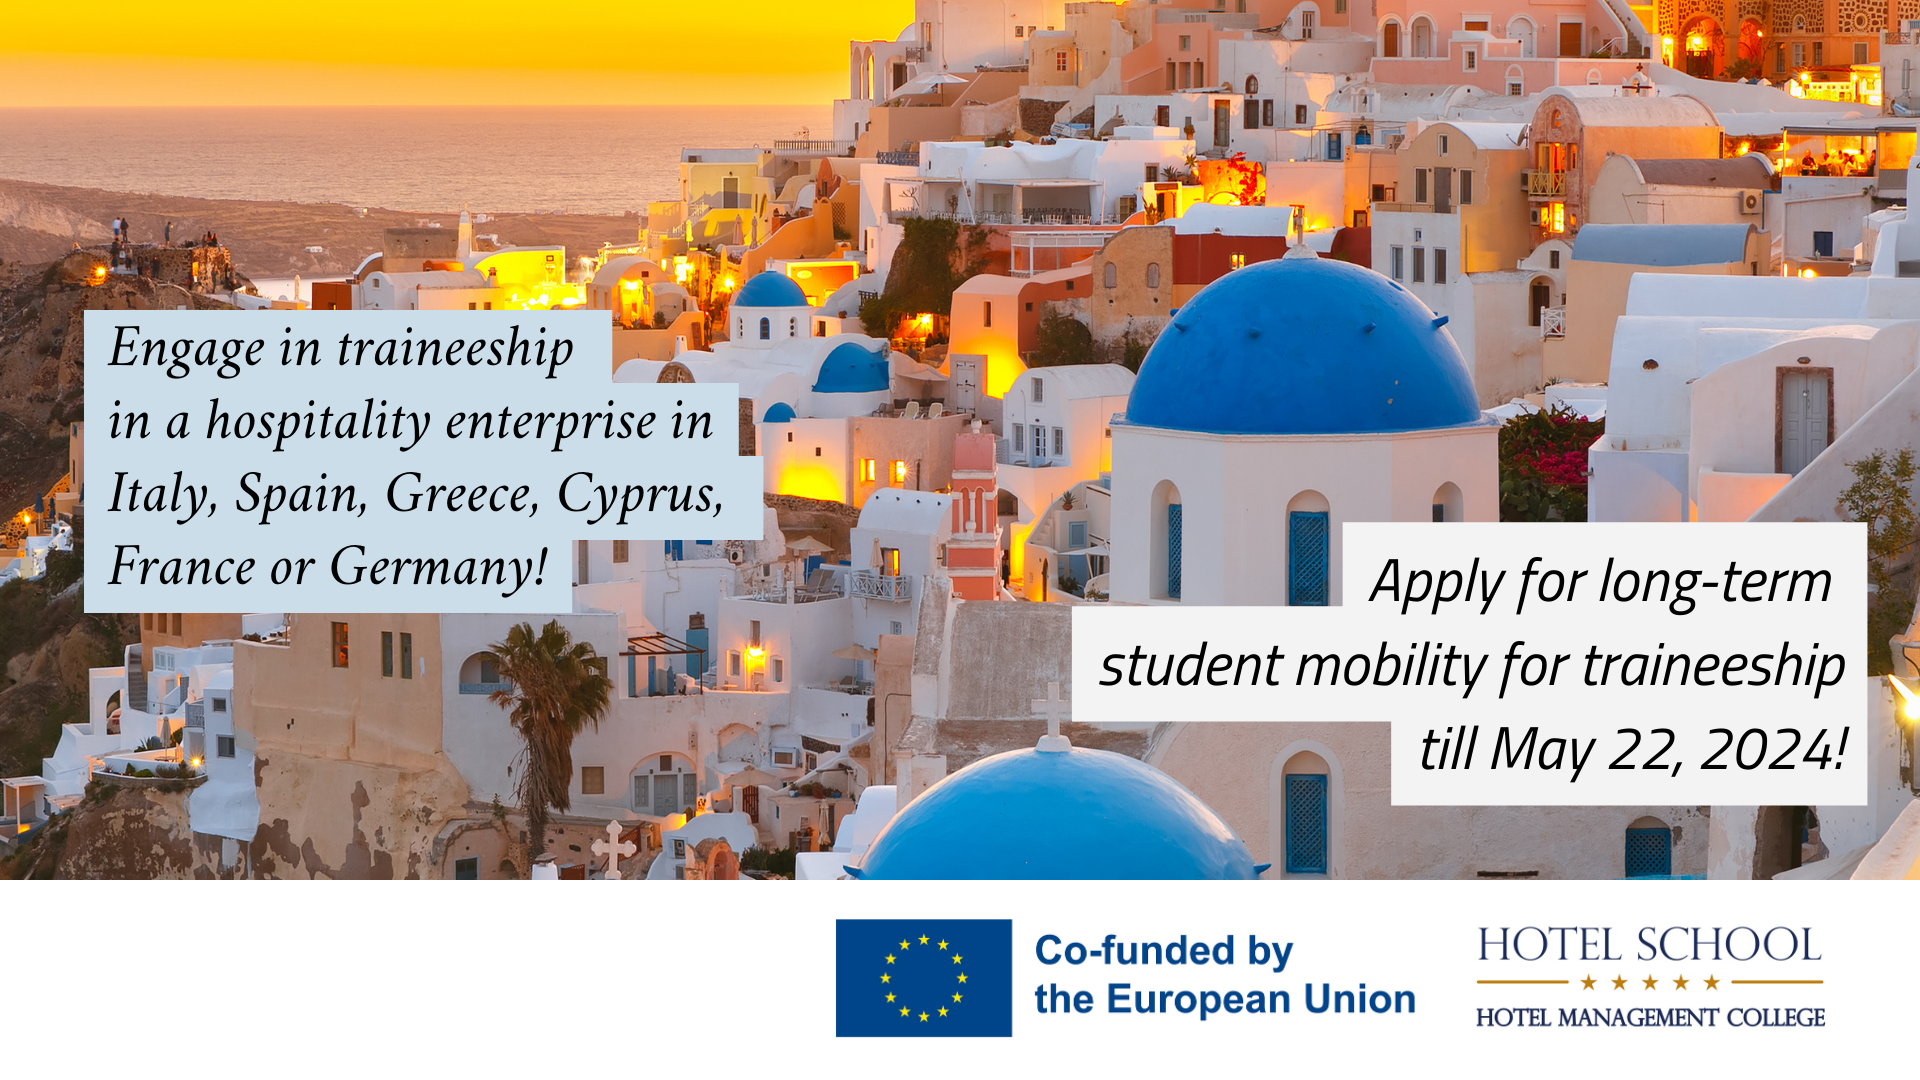 Erasmus Higher Education Student Mobility for Traineeships Call-2 (No. 2023-1-LV01-KA131-HED-000136703)